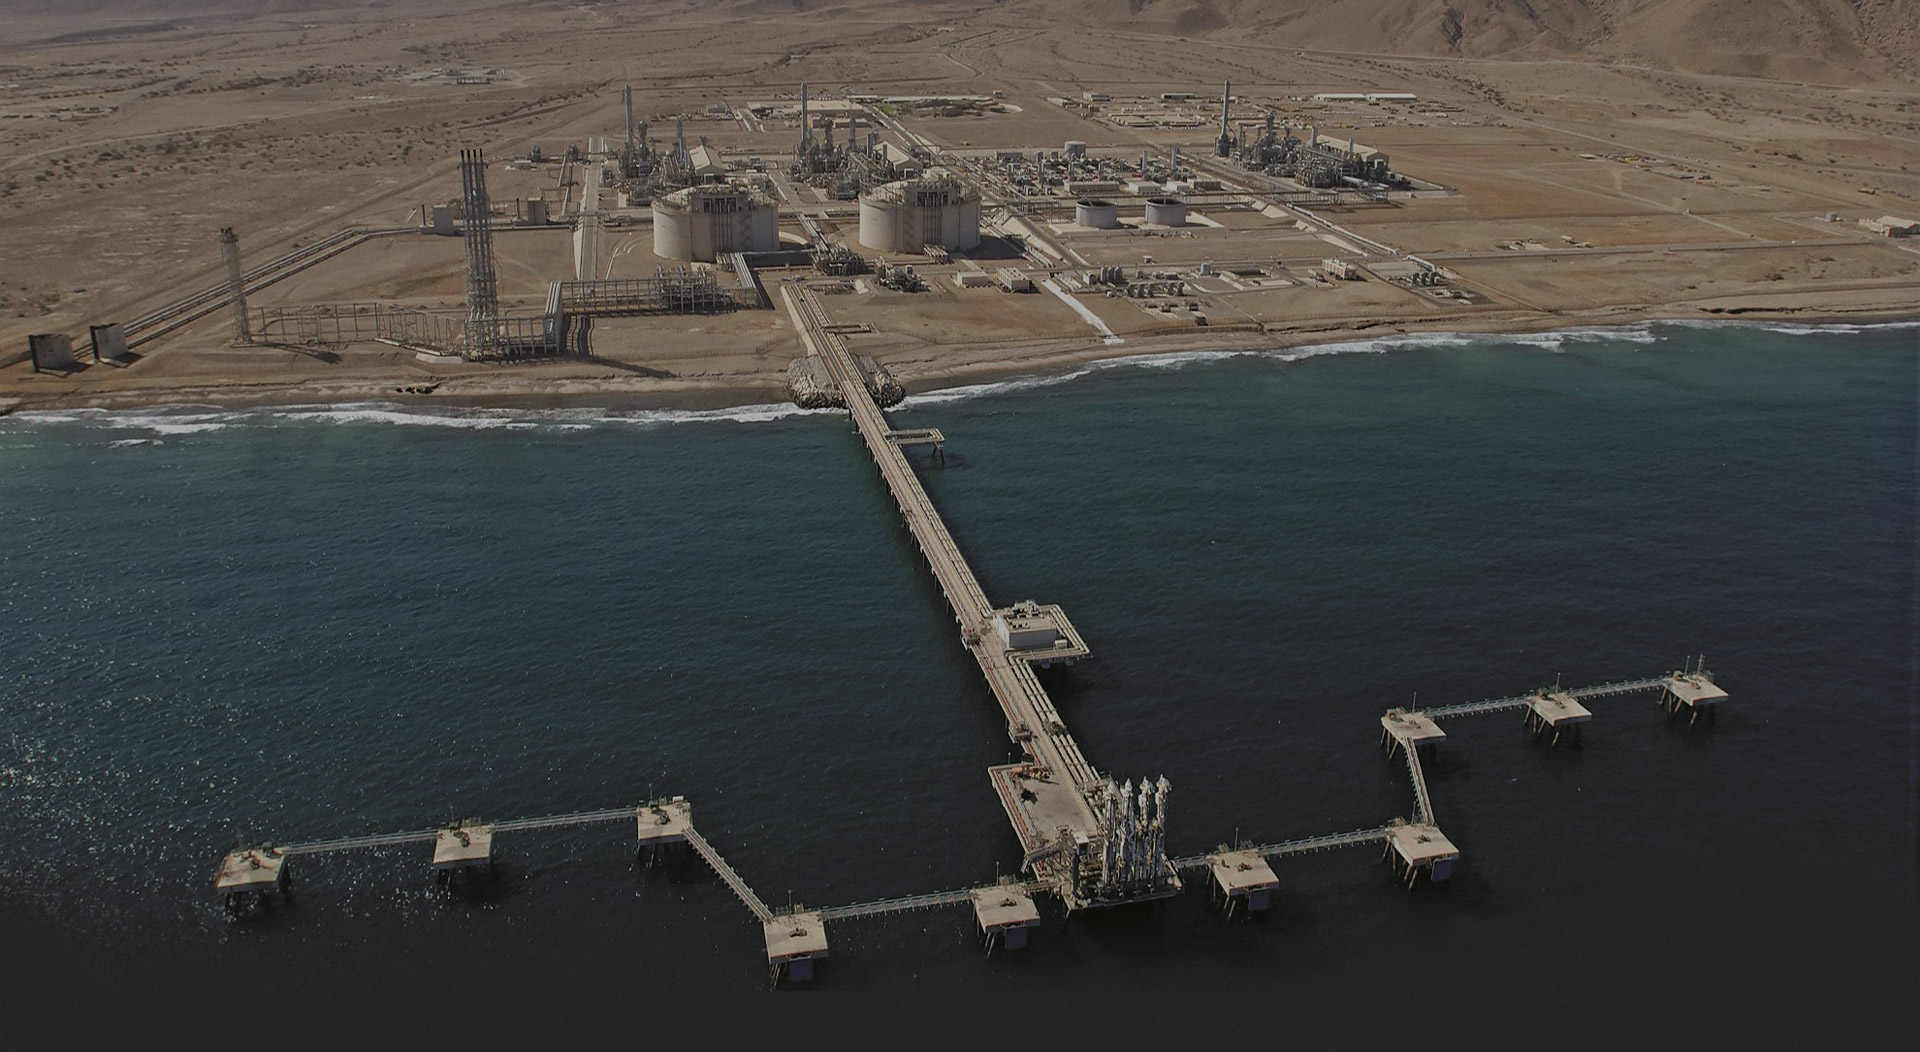 Oman LNG appoints new CEO